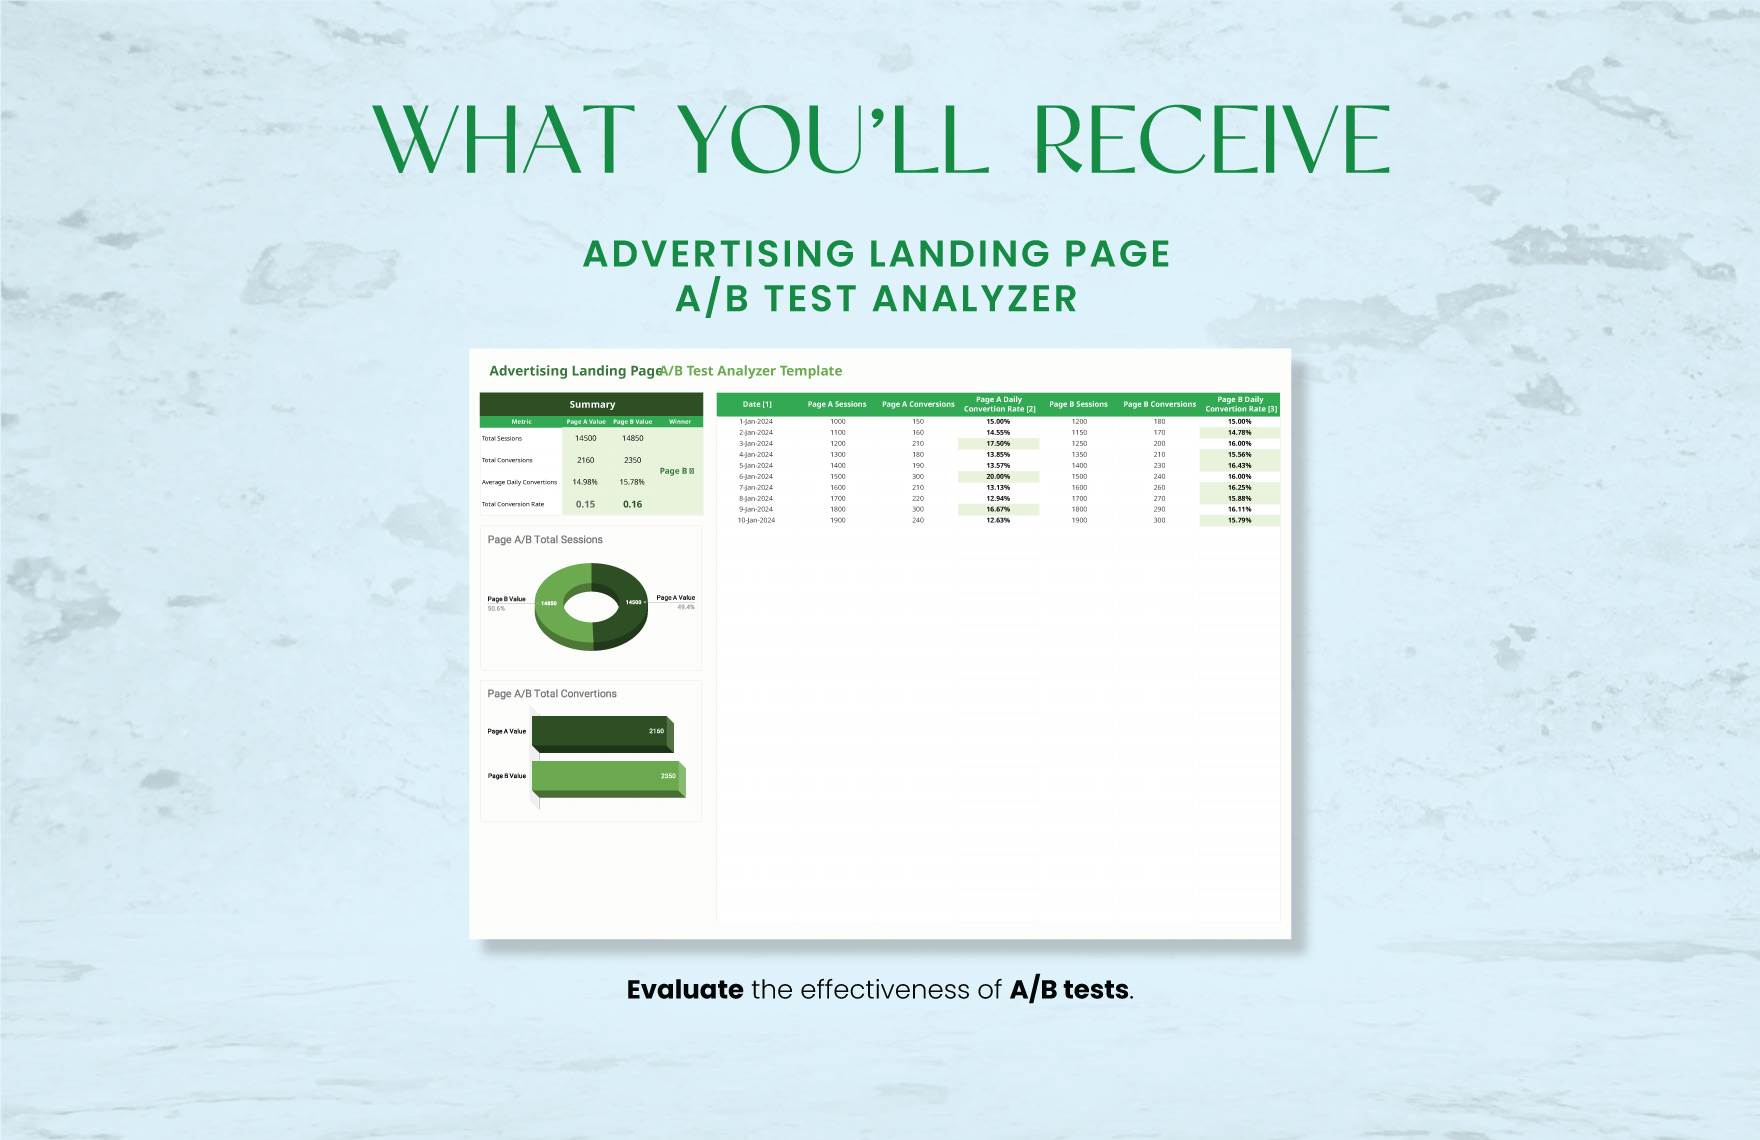 Advertising Landing Page A/B Test Analyzer Template